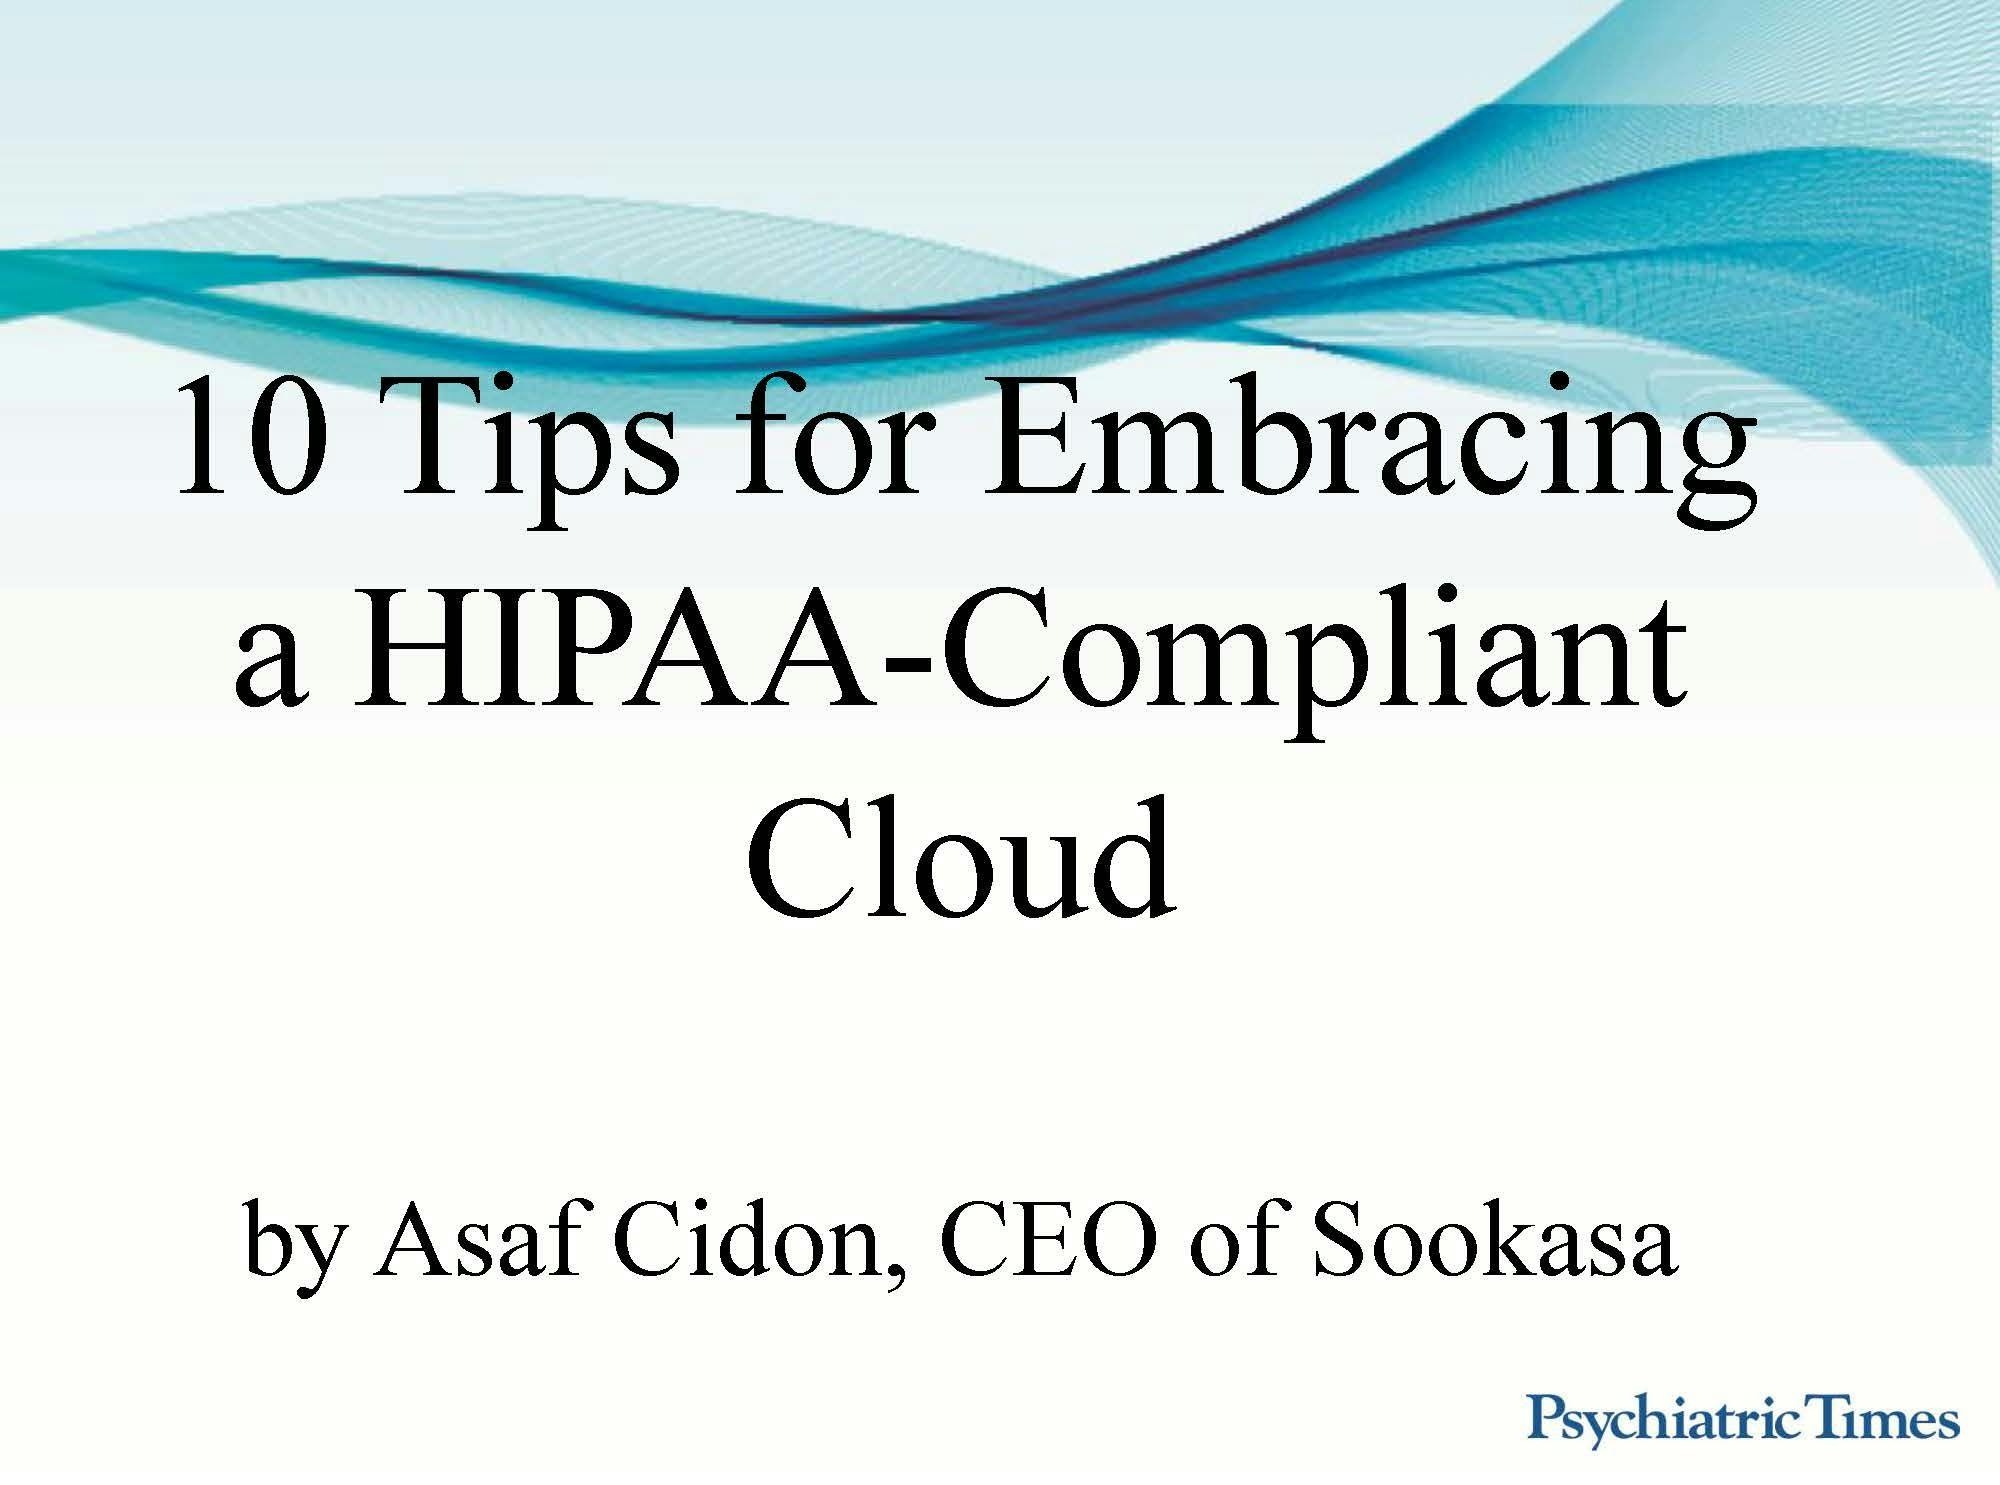 10 Tips for Embracing a HIPAA-Compliant Cloud